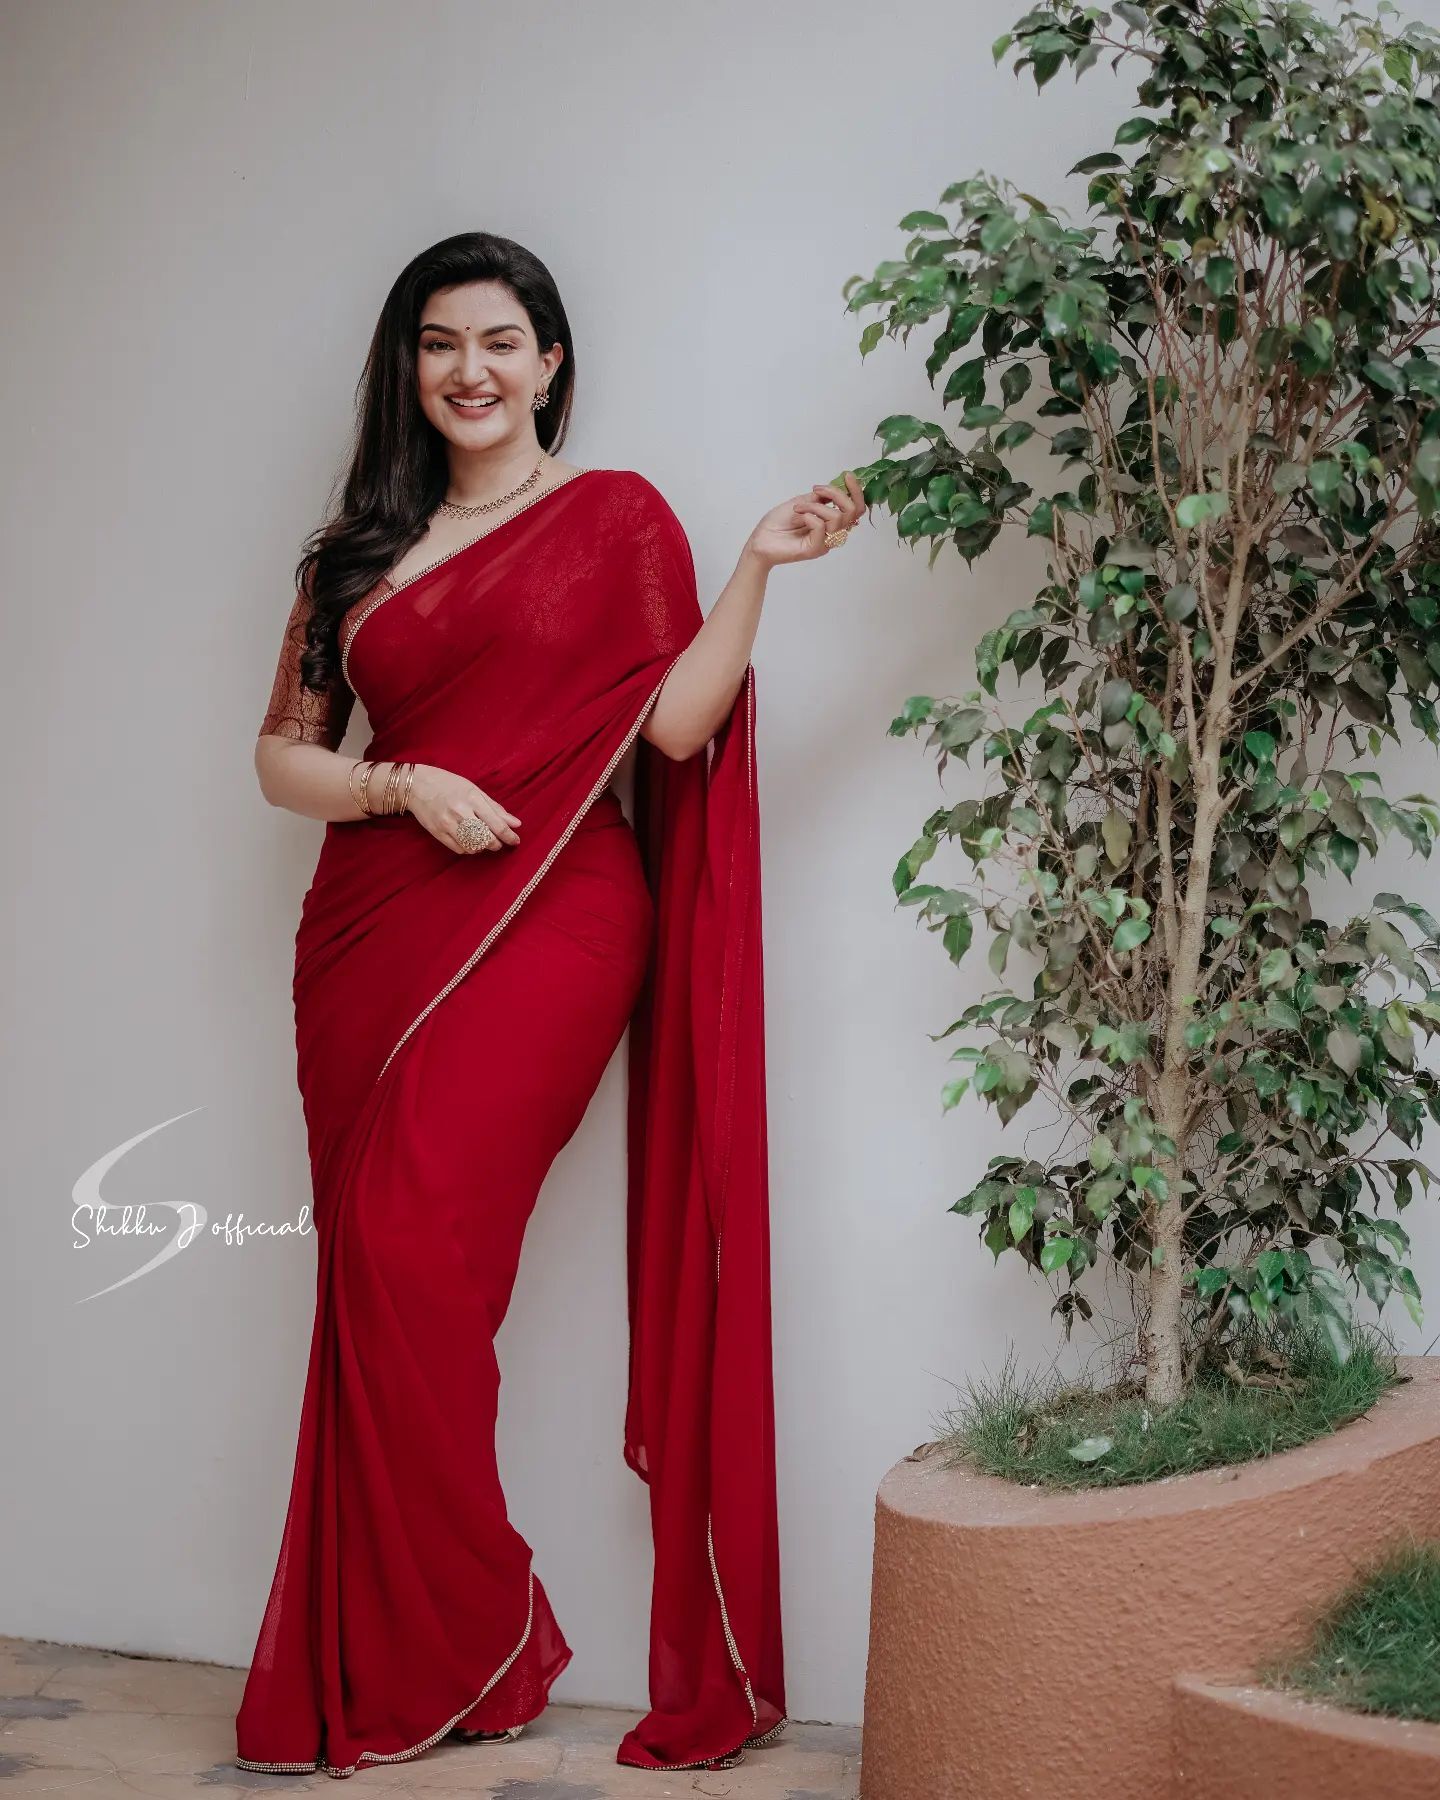 Honey Rose In Red Solid Saree Paired With Silk Maroon Blouse Traditional Outfits & Looks